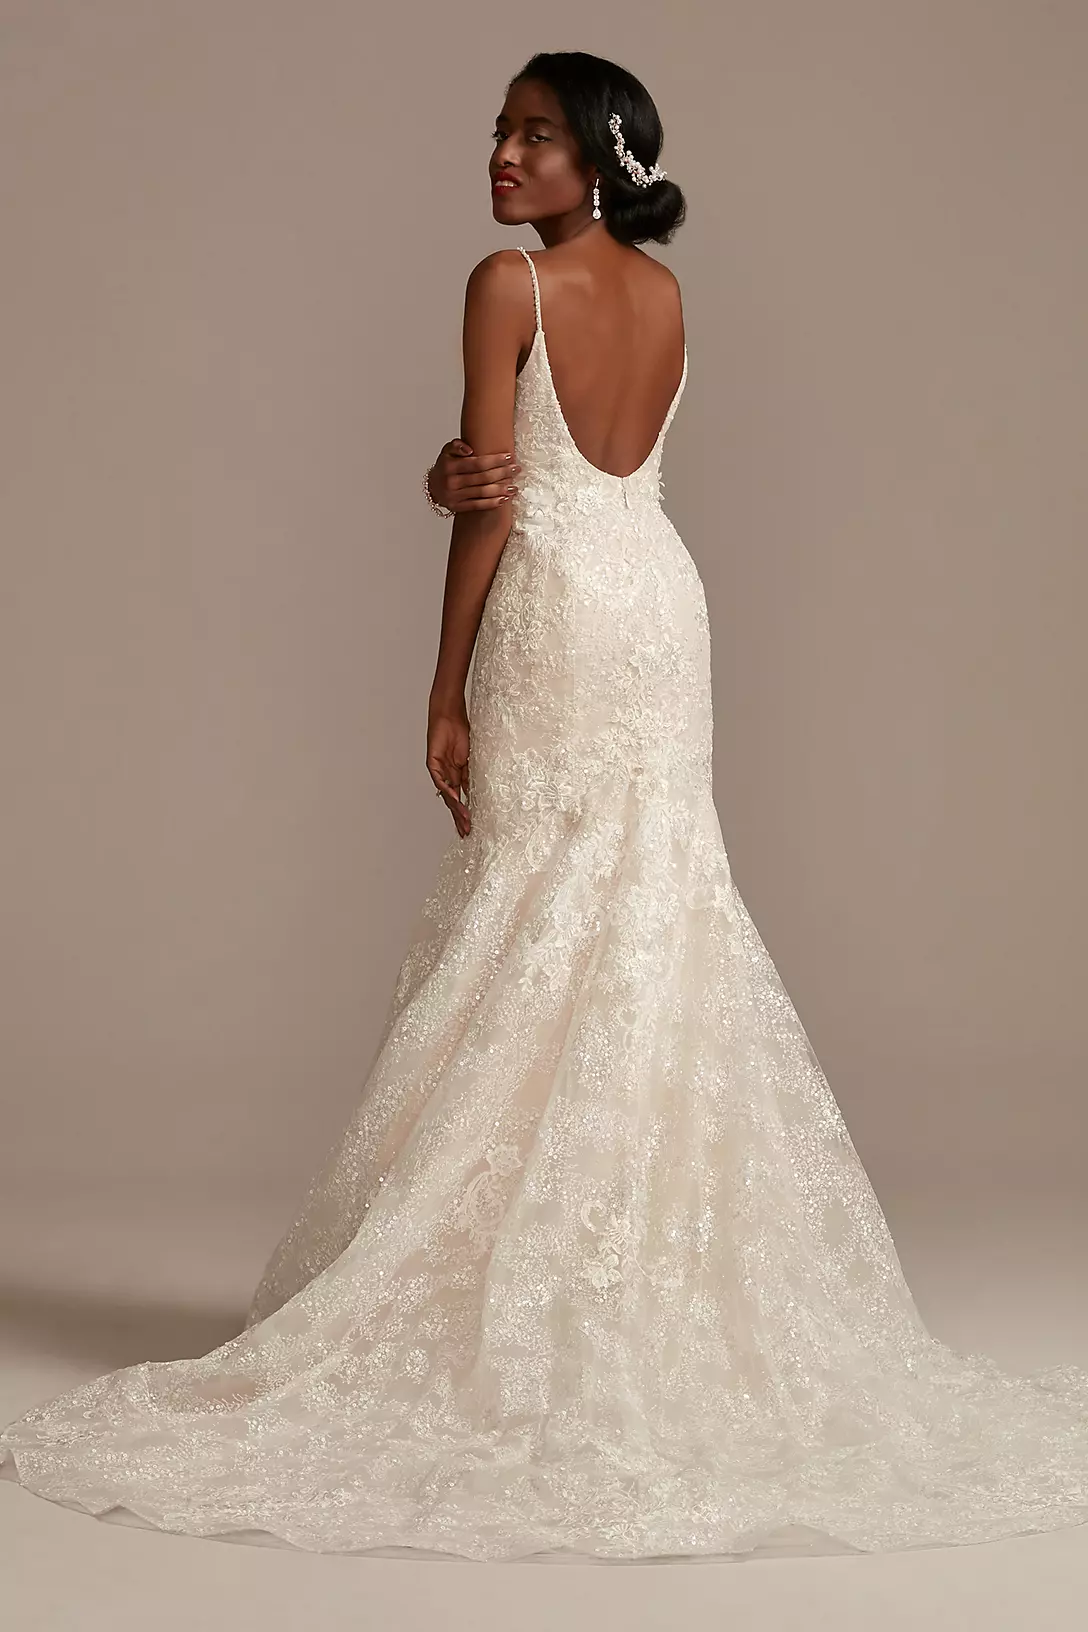 Sequin Lace Mermaid Wedding Dress with 3D Florals Image 2